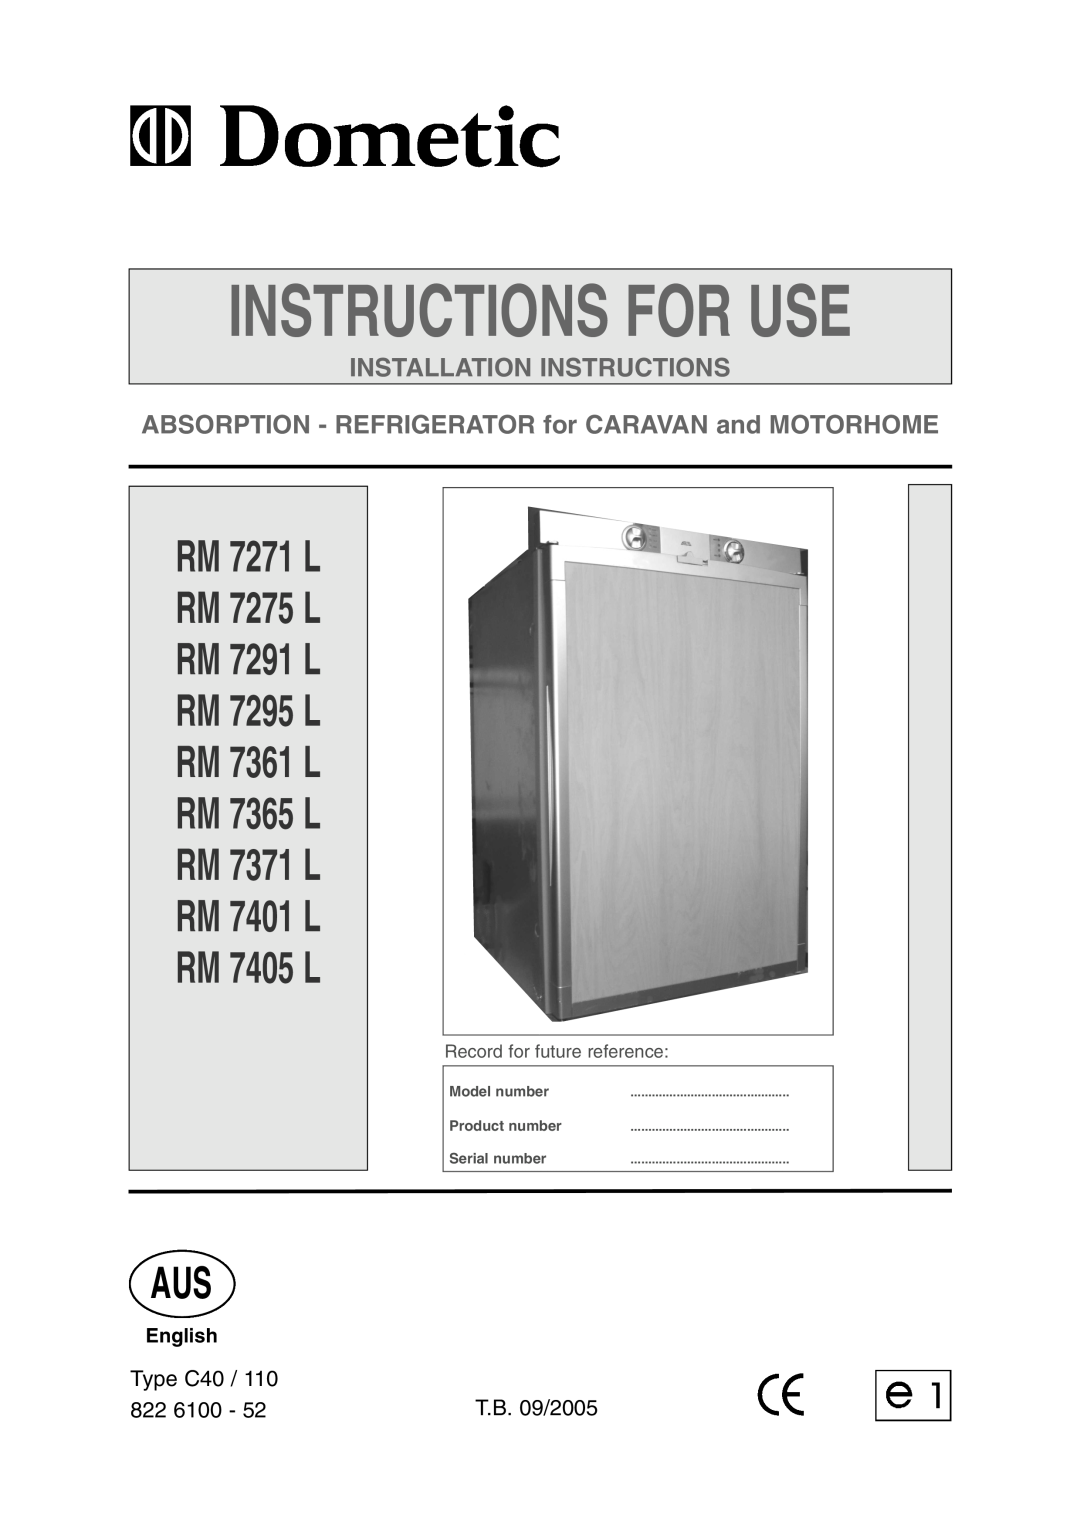 Dometic RM 7295 L installation instructions Type C40, T.B. 09/2005, Instructions For Use, Installation Instructions 